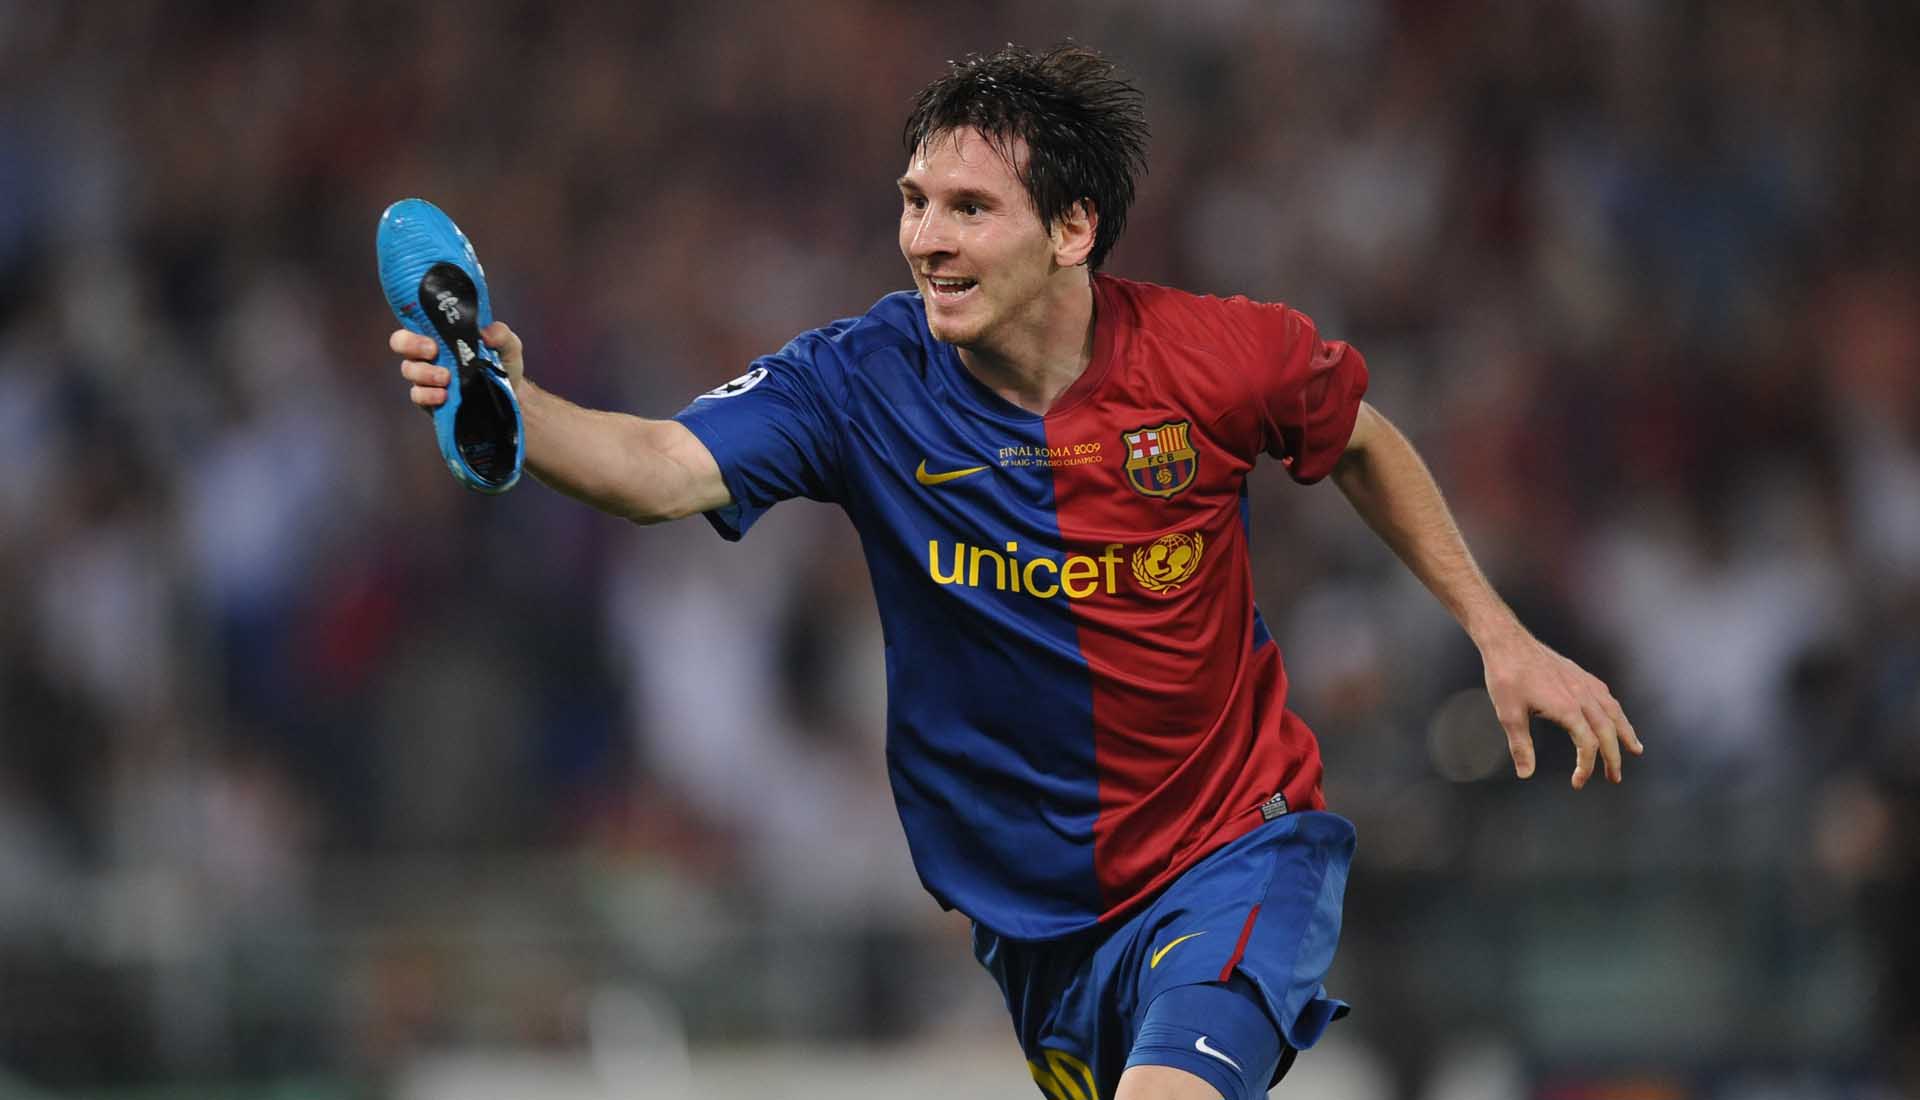 Happy Birthday to the Greatest Footballer of all time, Lionel Messi. 